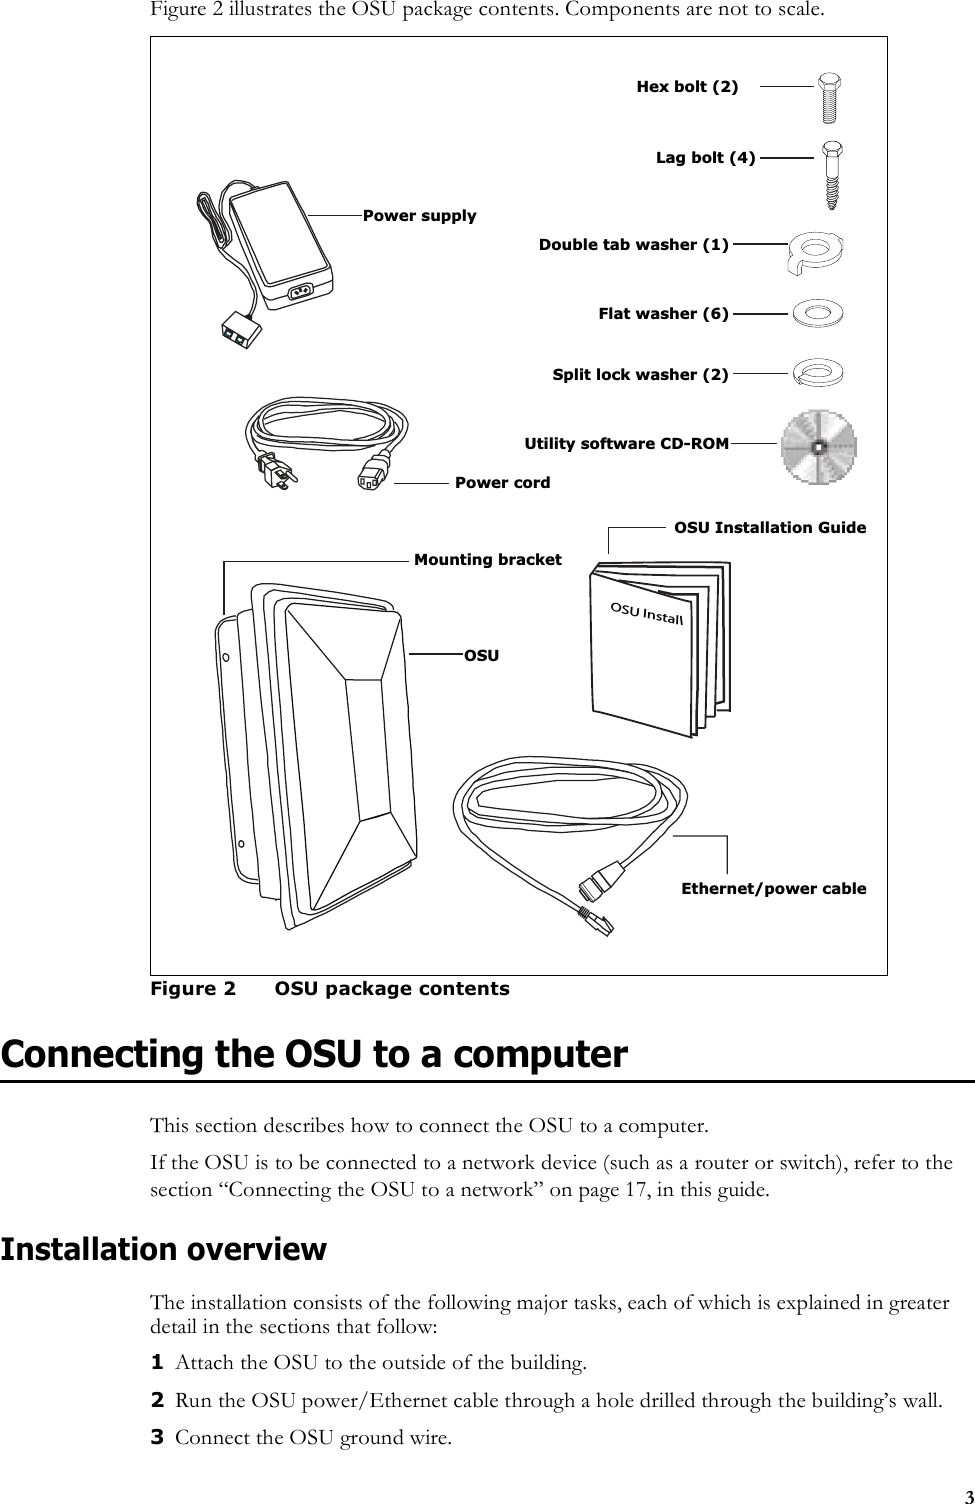 3Figure 2 illustrates the OSU package contents. Components are not to scale.Connecting the OSU to a computerThis section describes how to connect the OSU to a computer. If the OSU is to be connected to a network device (such as a router or switch), refer to the section “Connecting the OSU to a network” on page 17, in this guide. Installation overviewThe installation consists of the following major tasks, each of which is explained in greater detail in the sections that follow:1Attach the OSU to the outside of the building.2Run the OSU power/Ethernet cable through a hole drilled through the building’s wall.3Connect the OSU ground wire.Figure 2 OSU package contentsPower supplyOSUInstallOSU Installation GuideOSUMounting bracketUtility software CD-ROMDouble tab washer (1)Flat washer (6)Split lock washer (2)Power cordLag bolt (4)Hex bolt (2)Ethernet/power cable